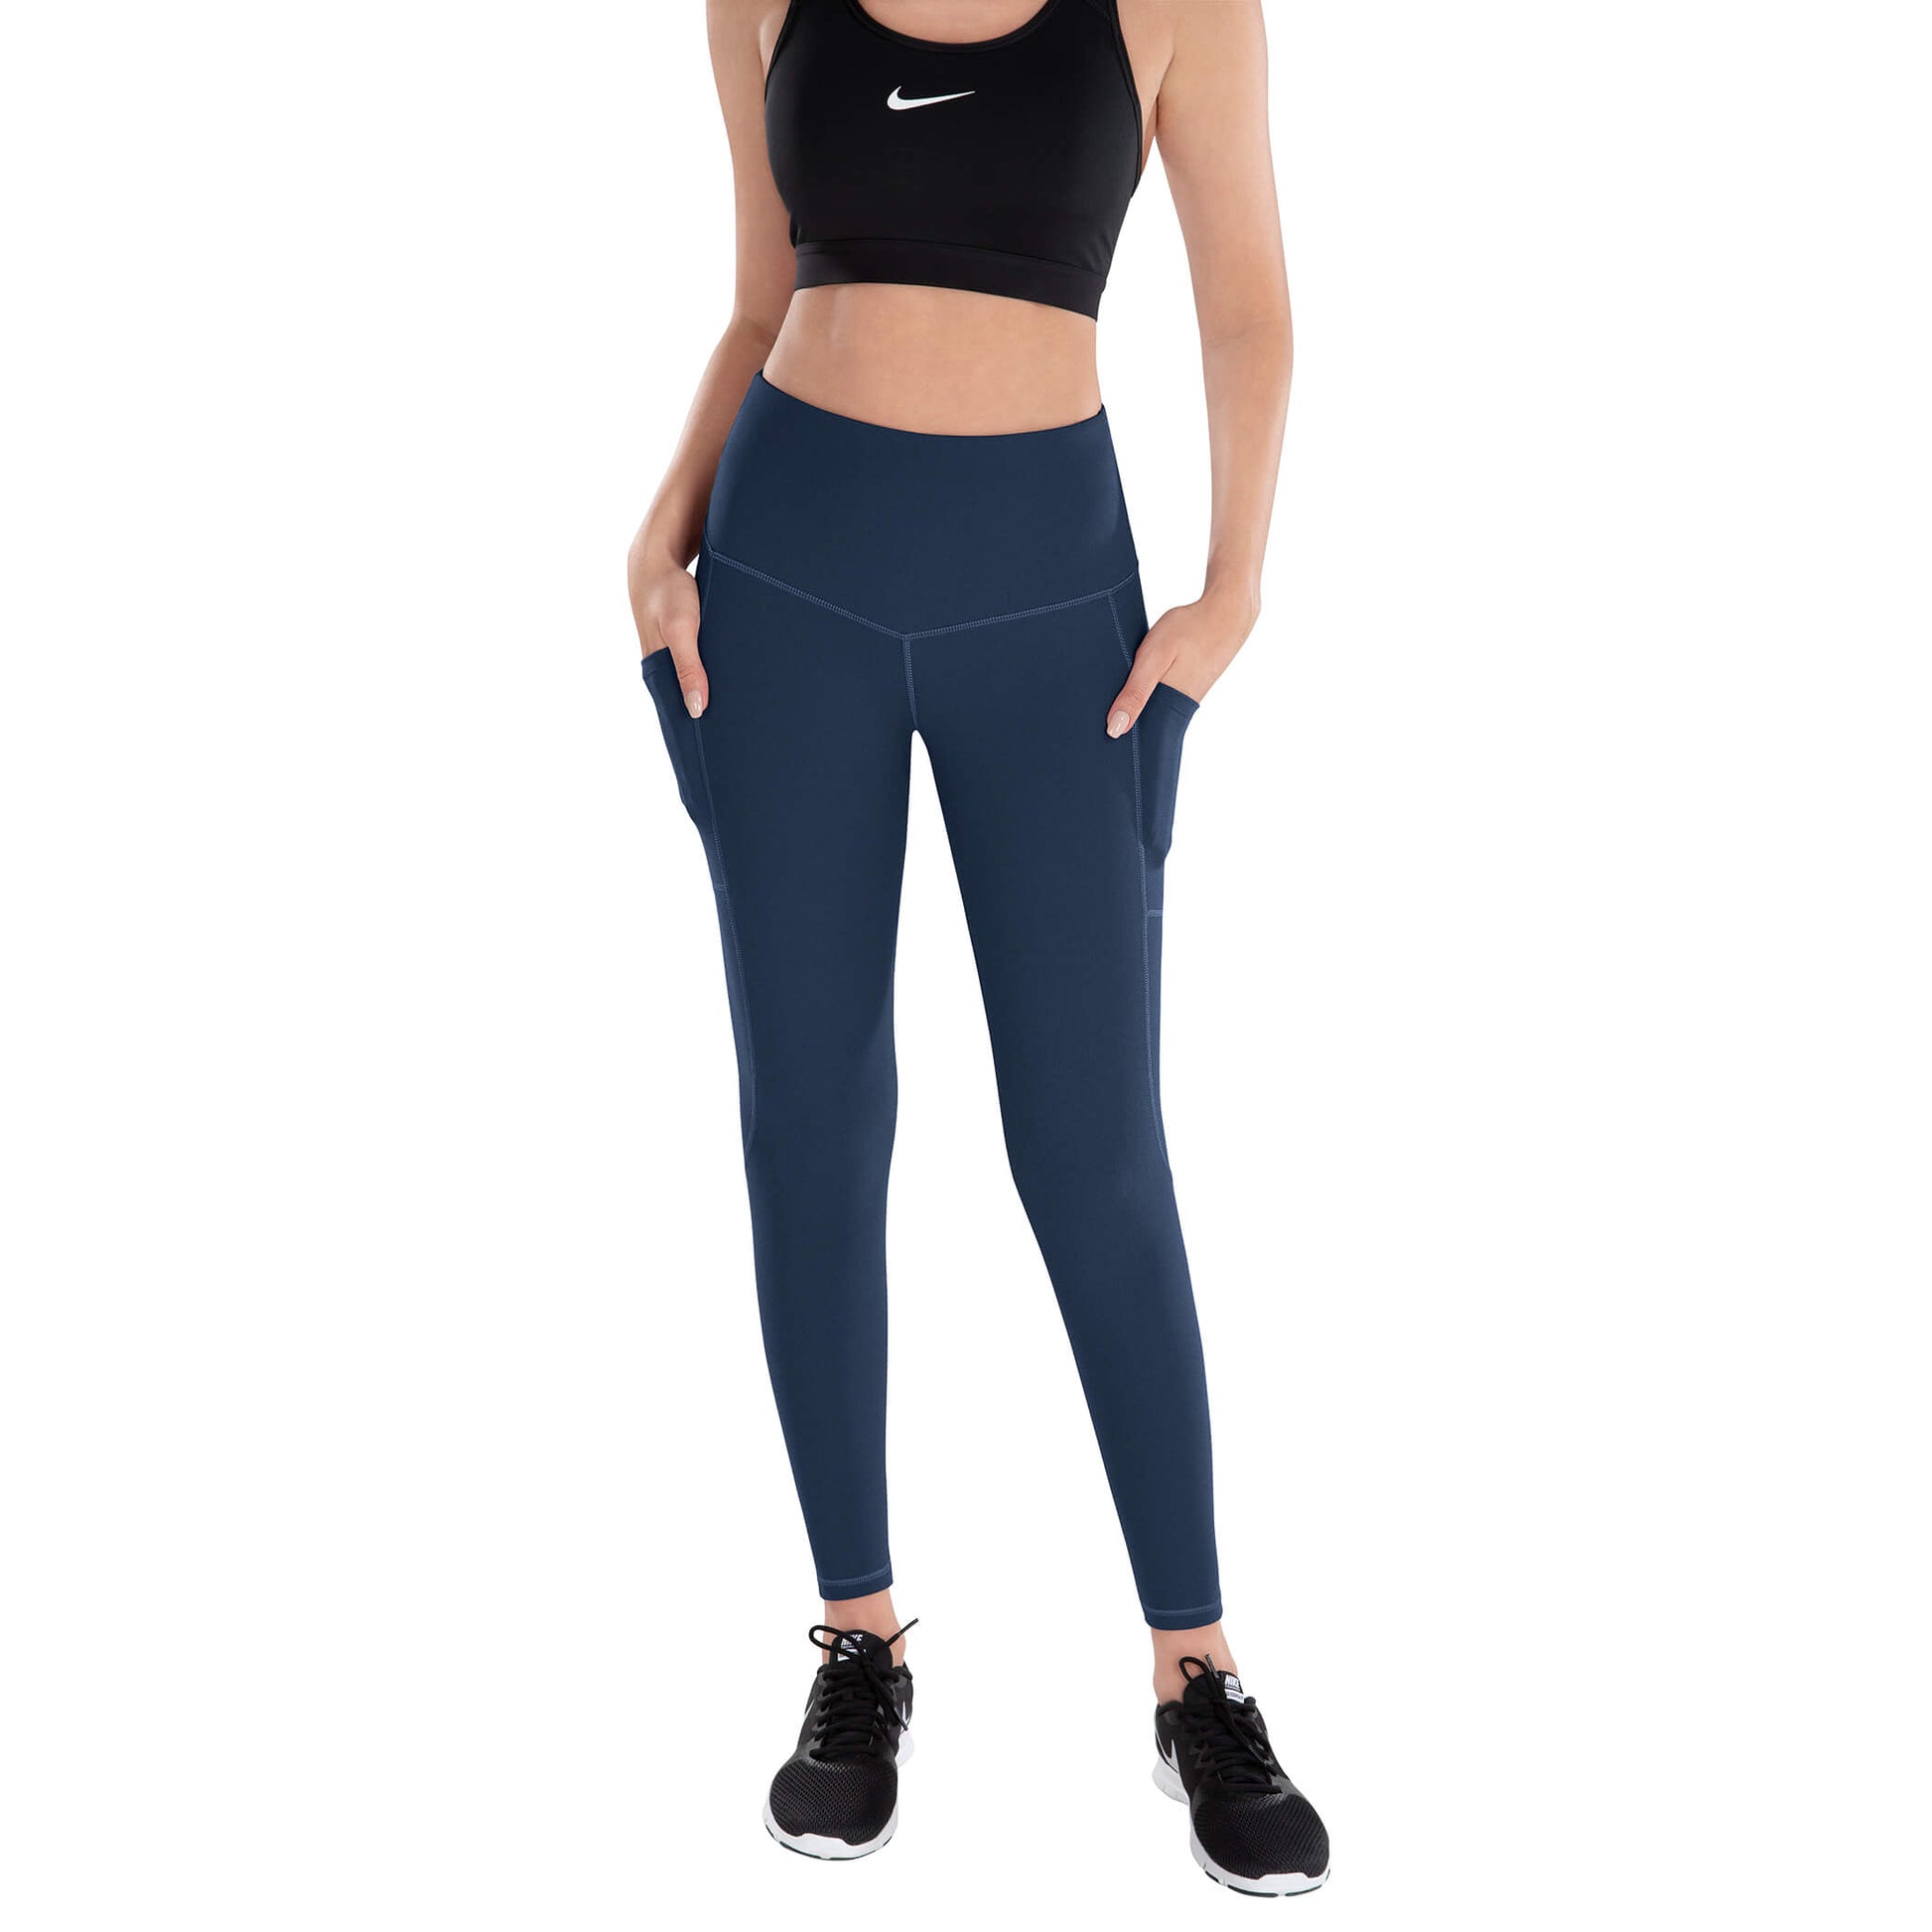 IUGA High Waist Yoga Pants with Pockets, These Are the $22 Workout Leggings  (With Pockets)  Customers Can't Stop Buying